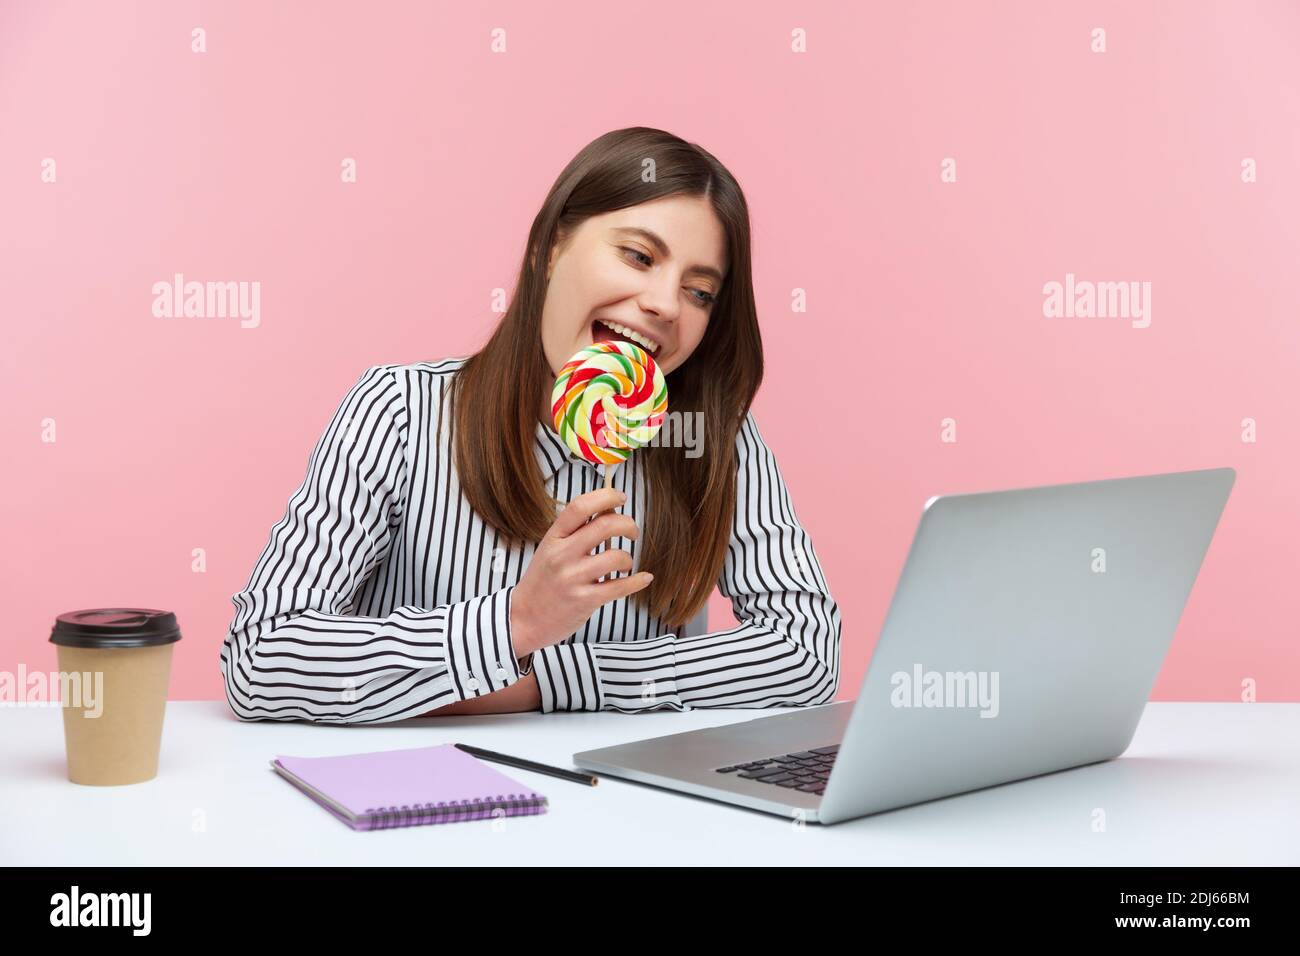 Funny playful woman licking and biting round colored lollipop on stick talking on video call at laptop sitting at workplace, having fun. Indoor studio Stock Photo